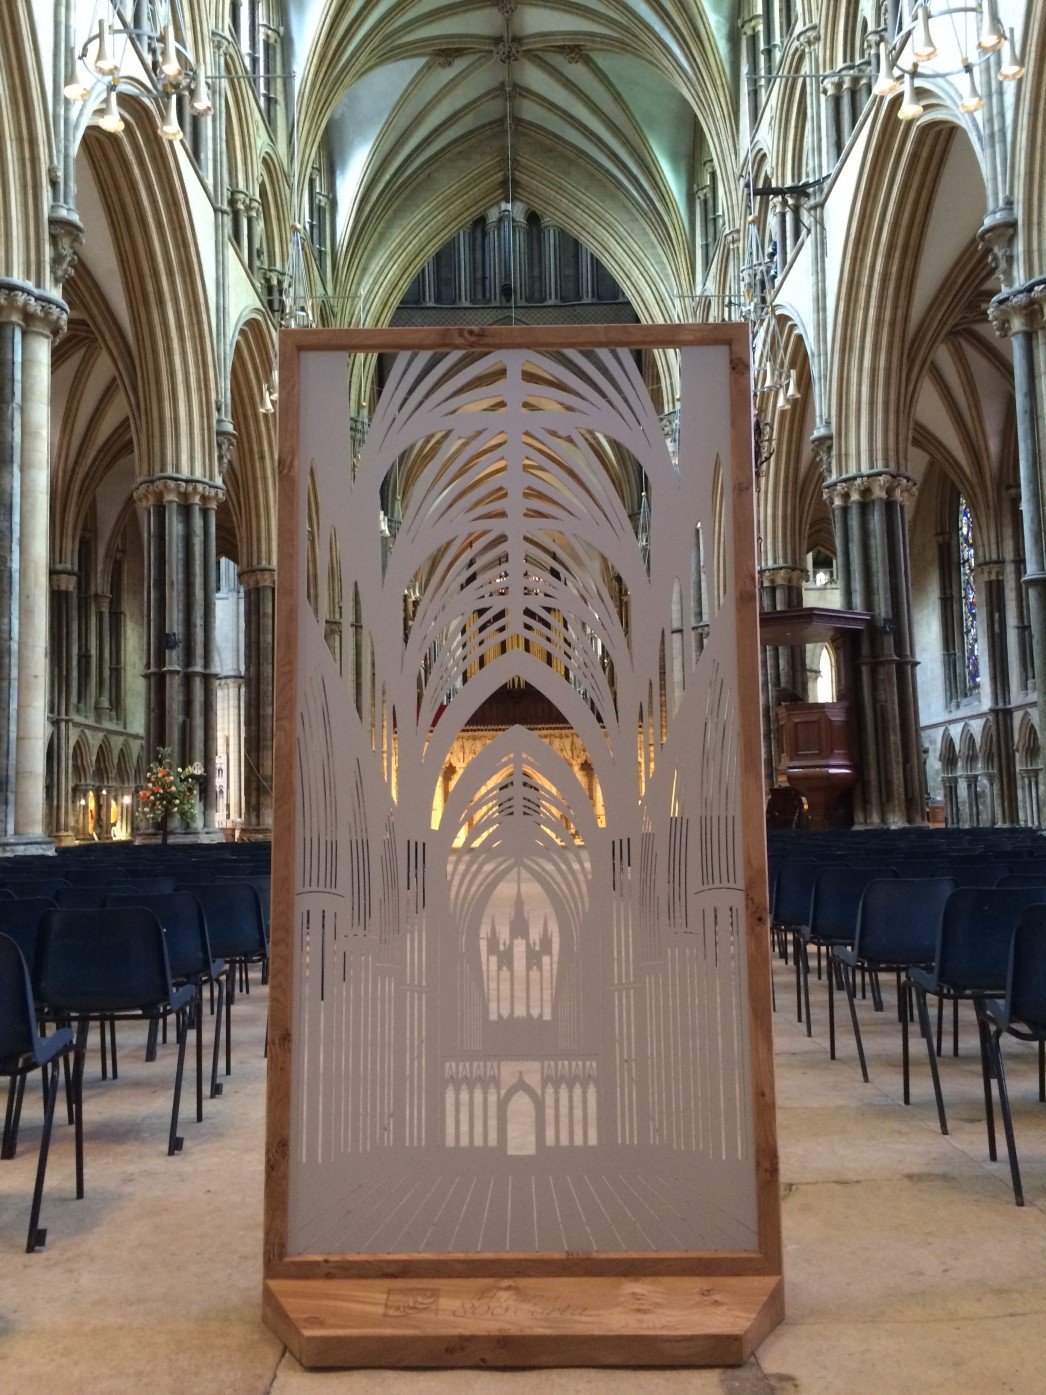 The decorative screen is now on display at Lincoln Cathedral.